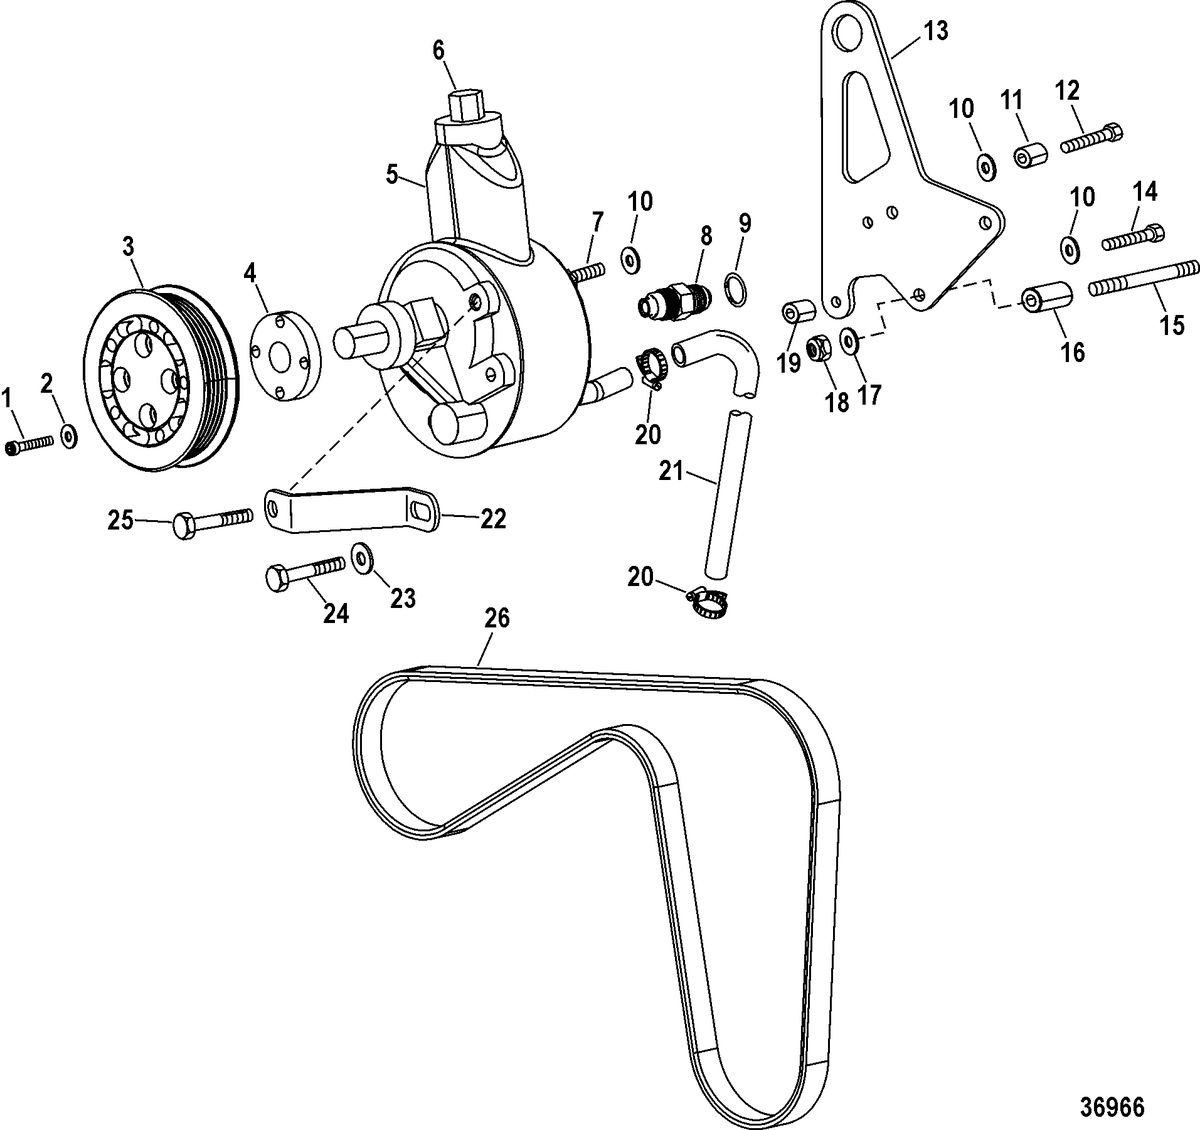 RACE STERNDRIVE 1075 SCI Power-Assisted Steering Components(Design IV)